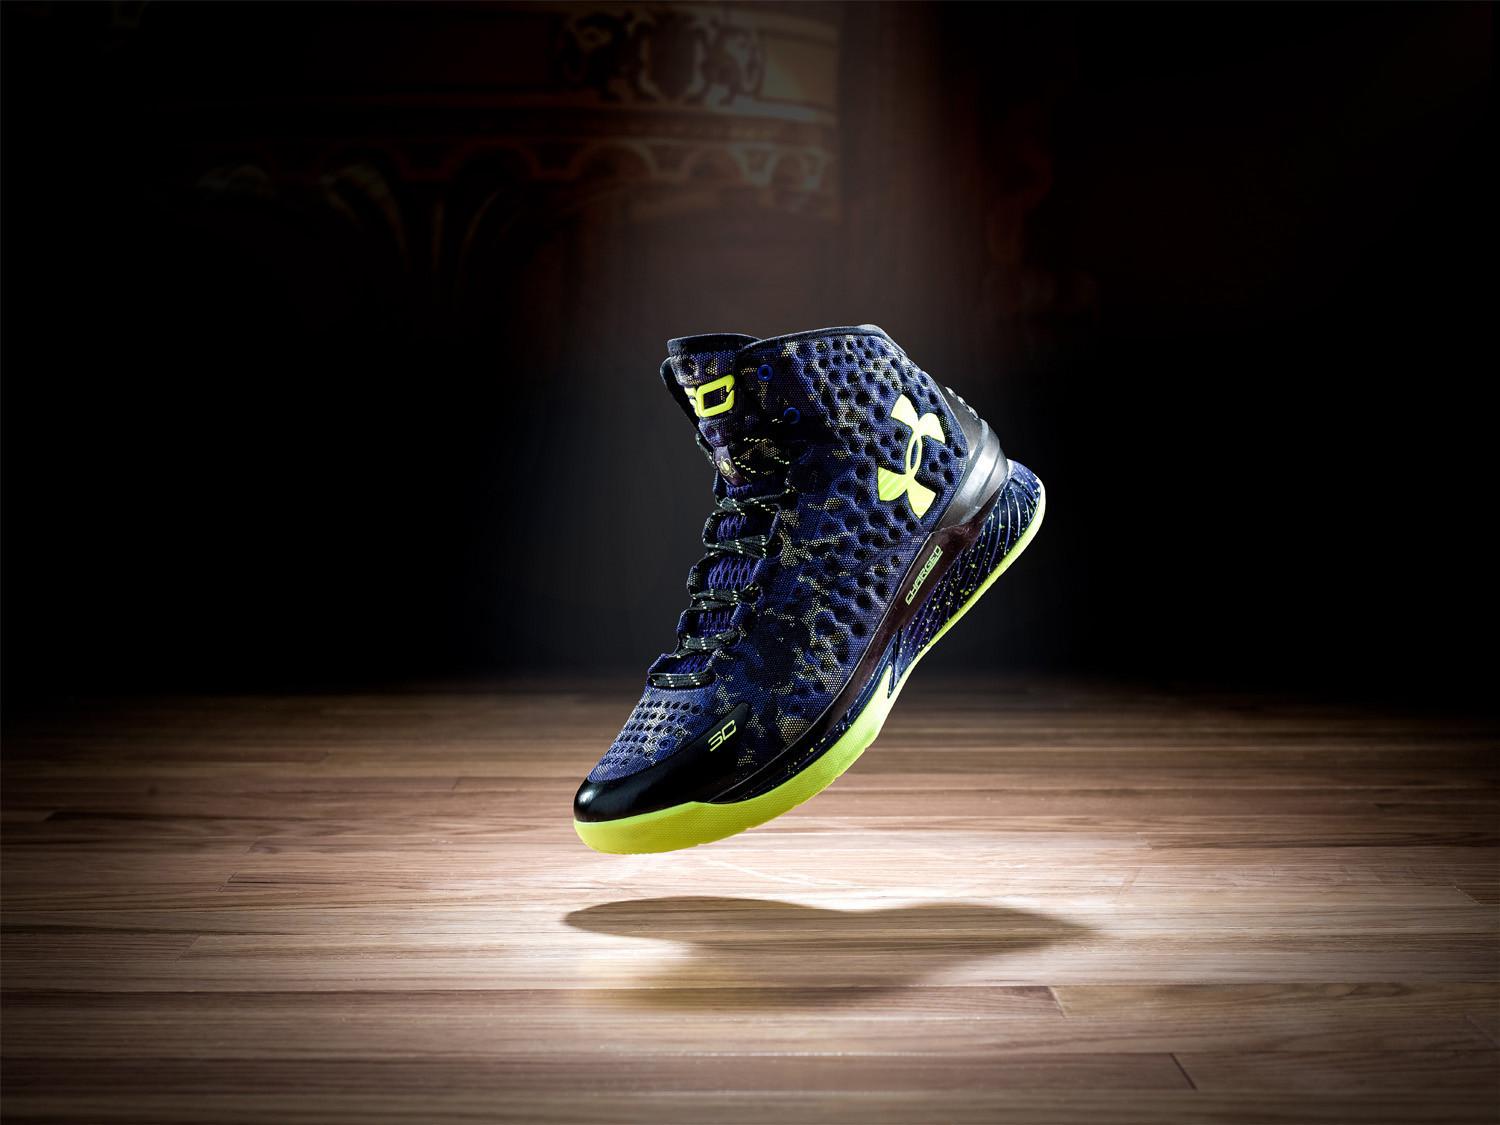 Under Armour introduces the Curry One shoe